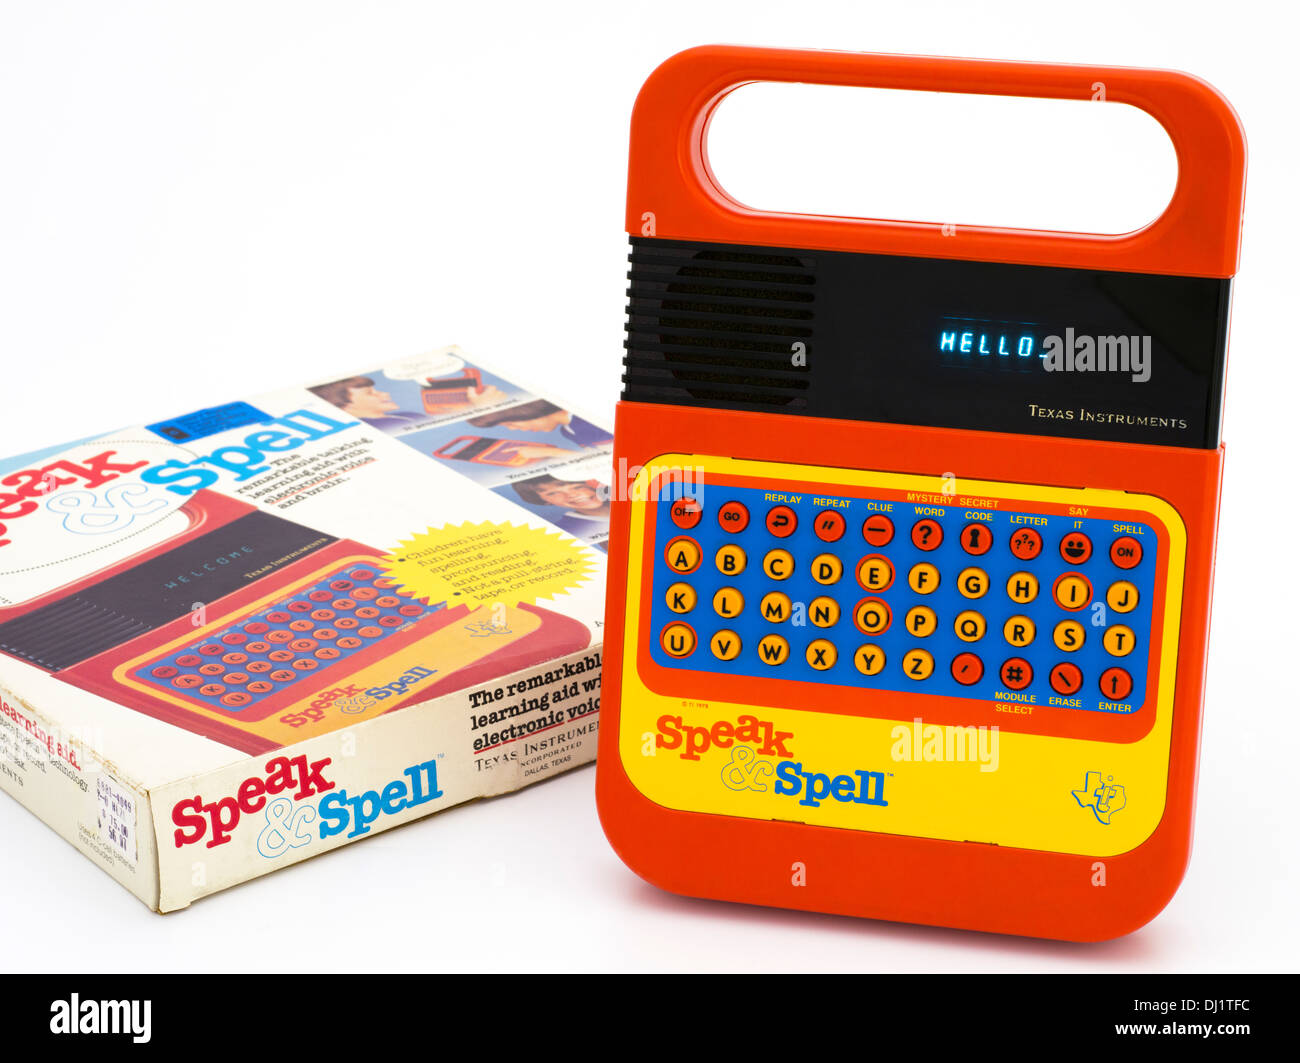 Original Speak & Spell by Texas Instruments 1978 an electronic handheld educational toy Stock Photo